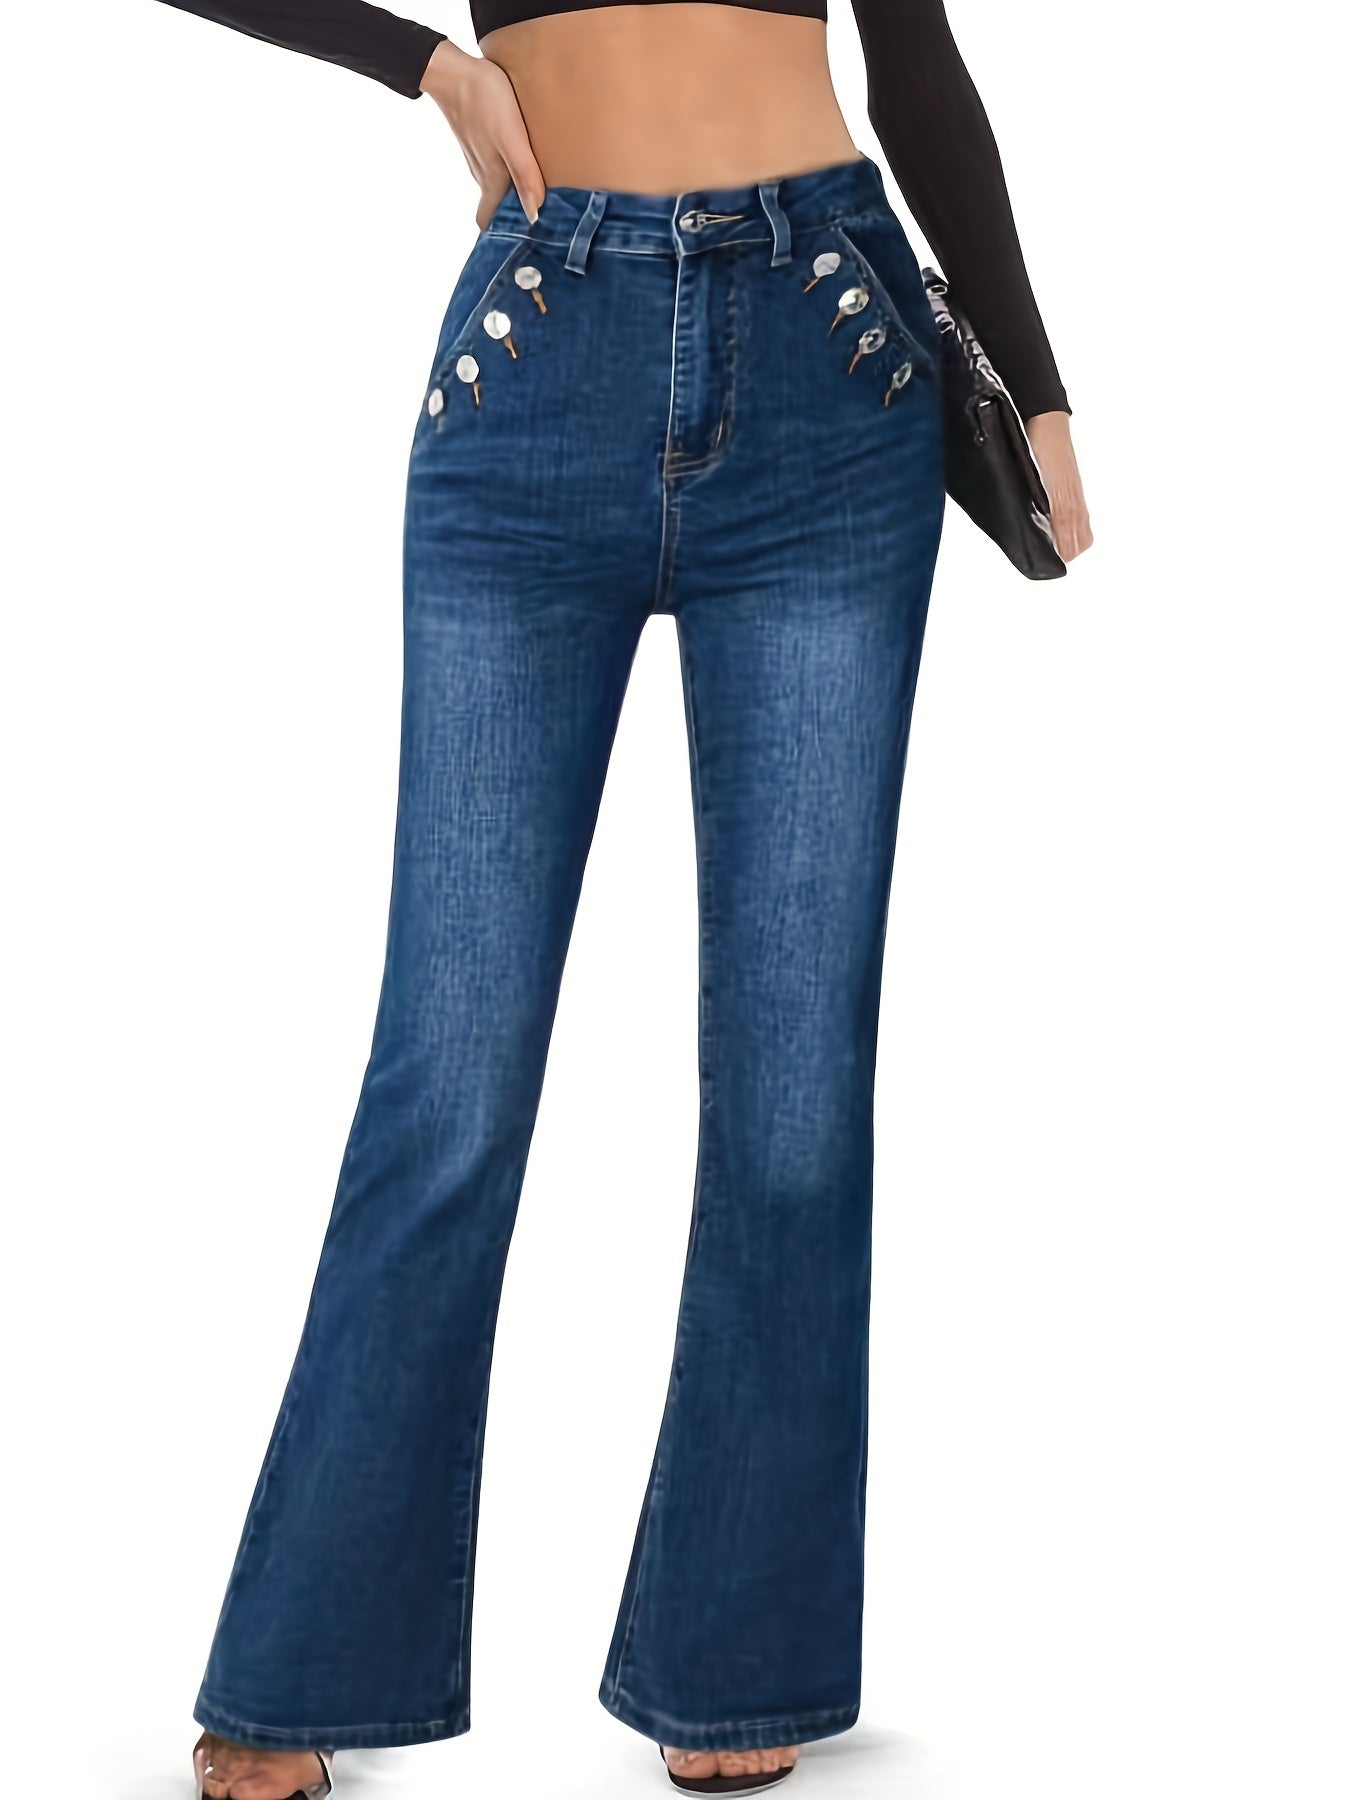 xieyinshe  Blue Mid Stretch Flare Jeans, Slant Pockets Double Single-Breasted Button Decor Bell Bottom Jeans, Women's Denim Jeans & Clothing